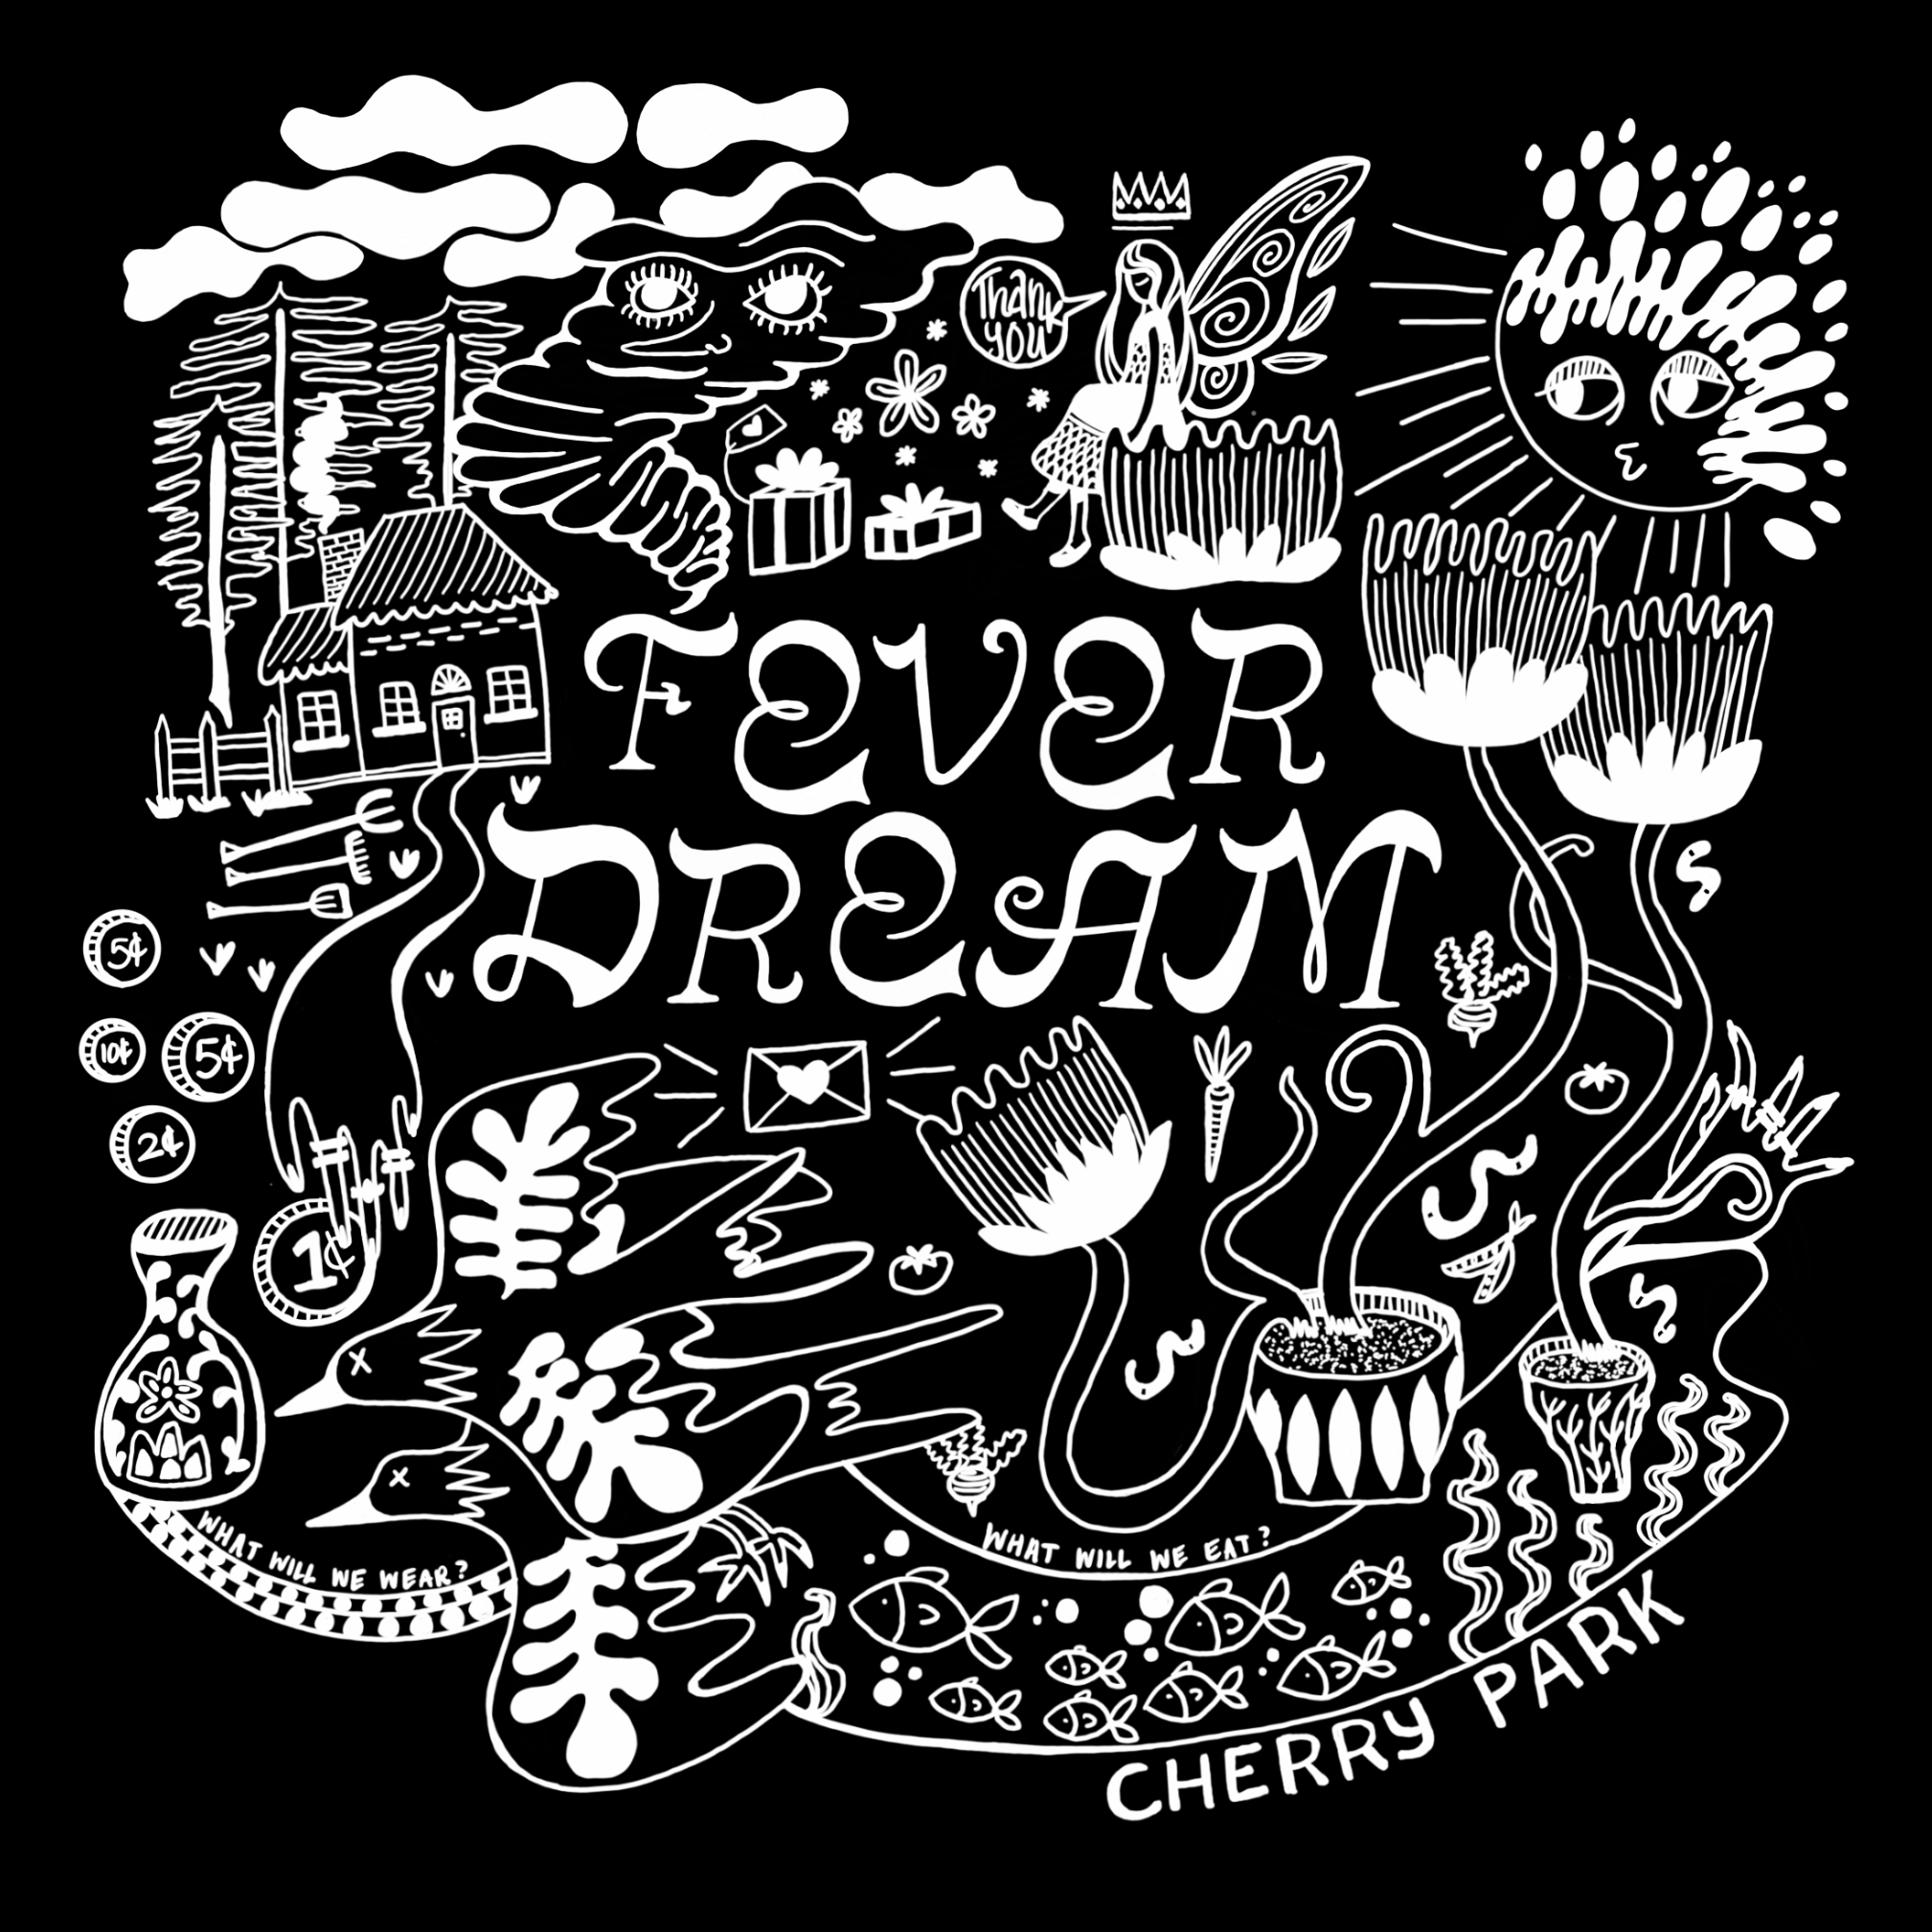 Cherry Park band's clothing merchandise style option: Fever Dream Graphic